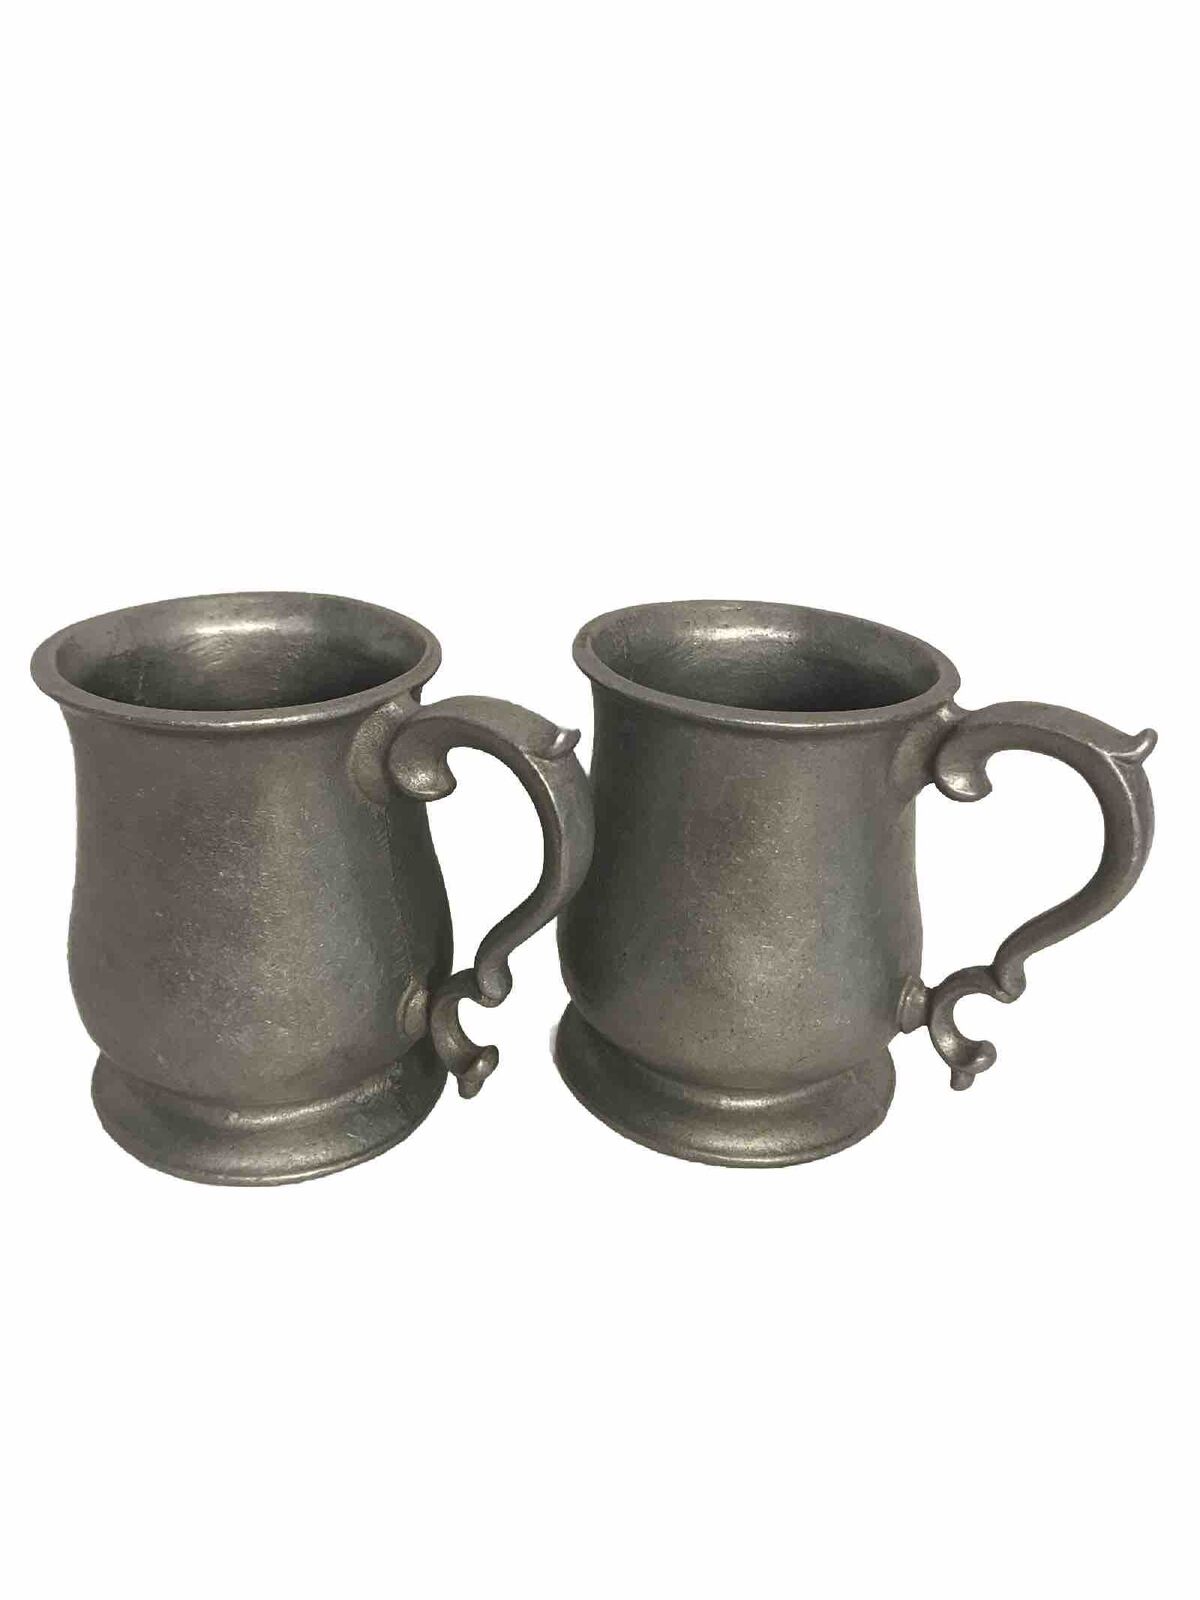 Pewter Tankards mugs Vintage Room Decor Made in USA, Medieval